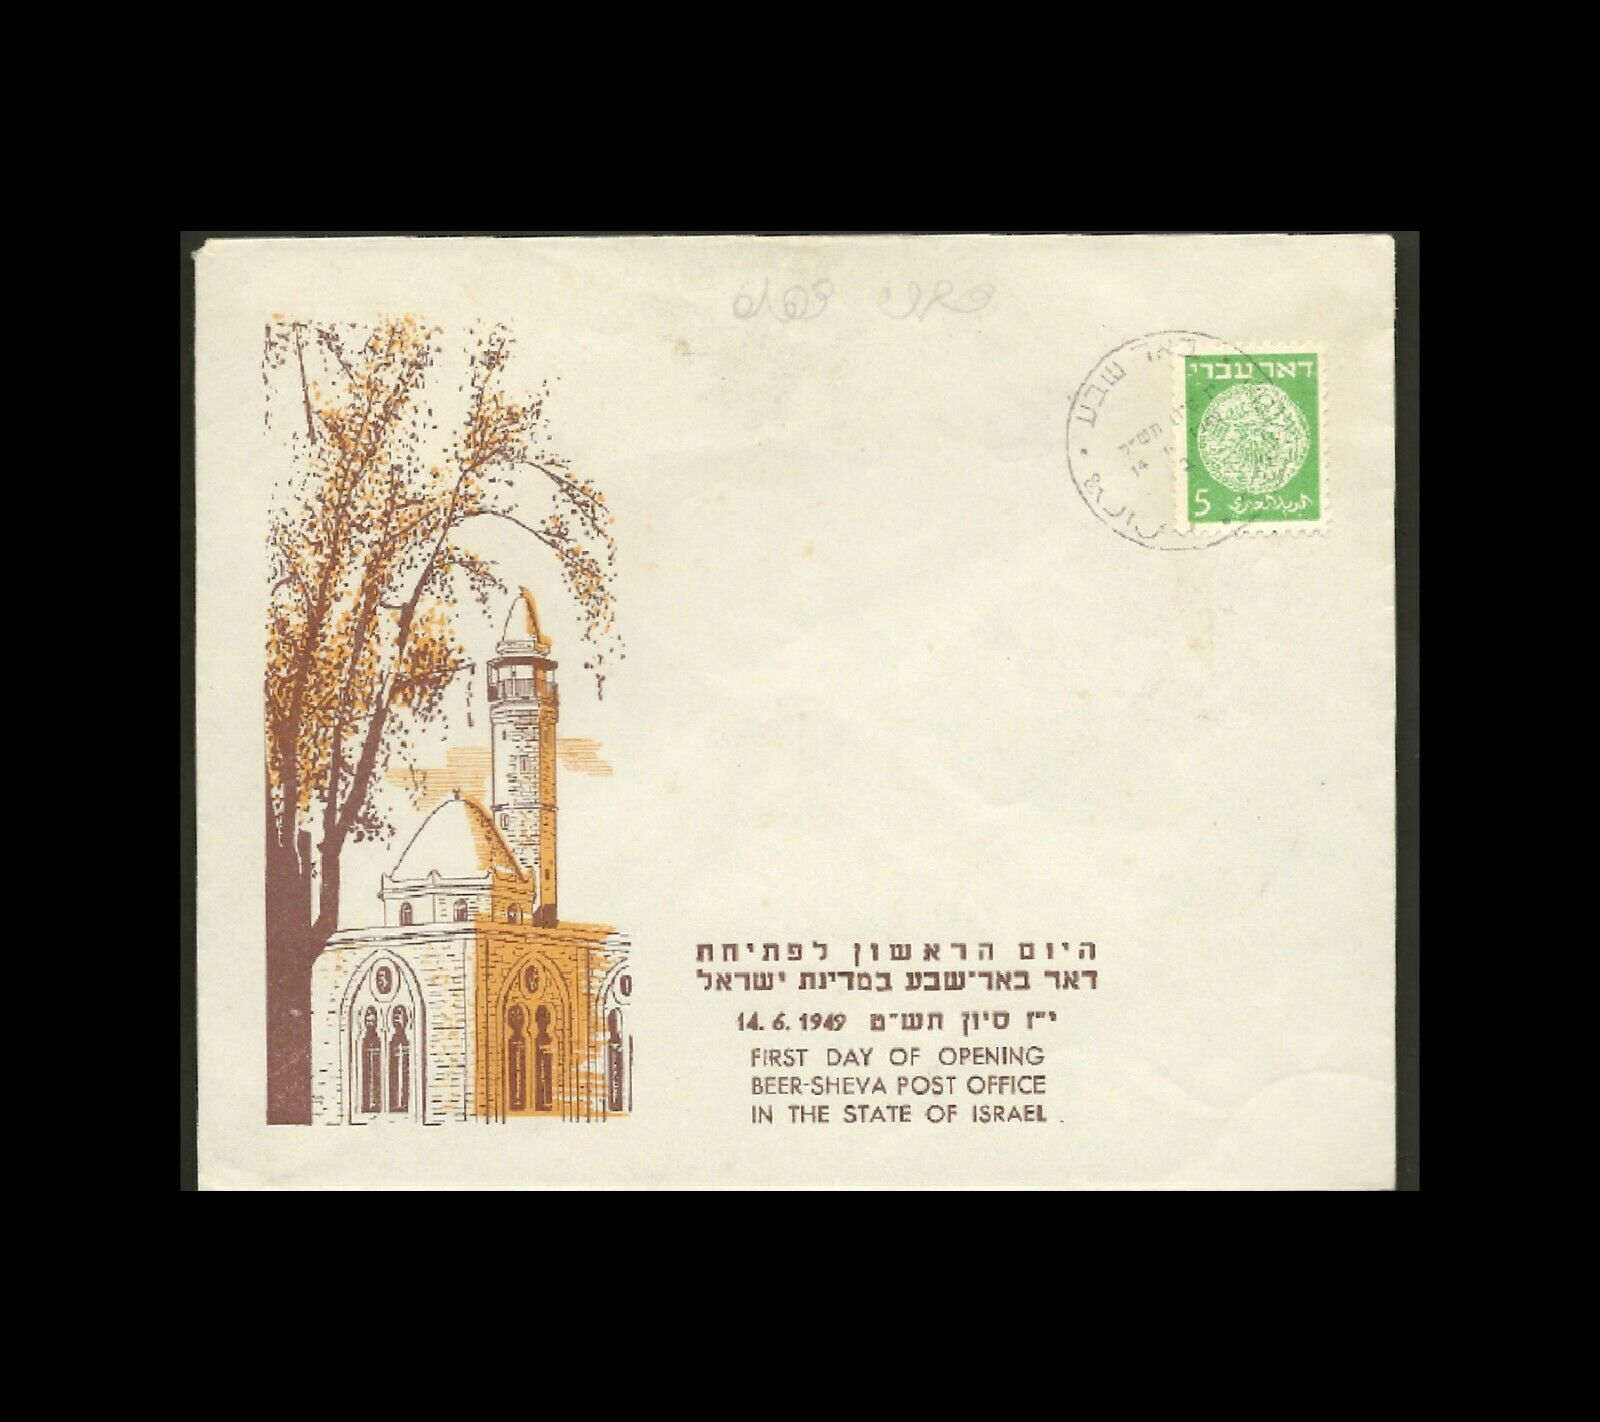 Israel 1949 Beer Sheva  Post Office Opening Cover 14,6.1949 1